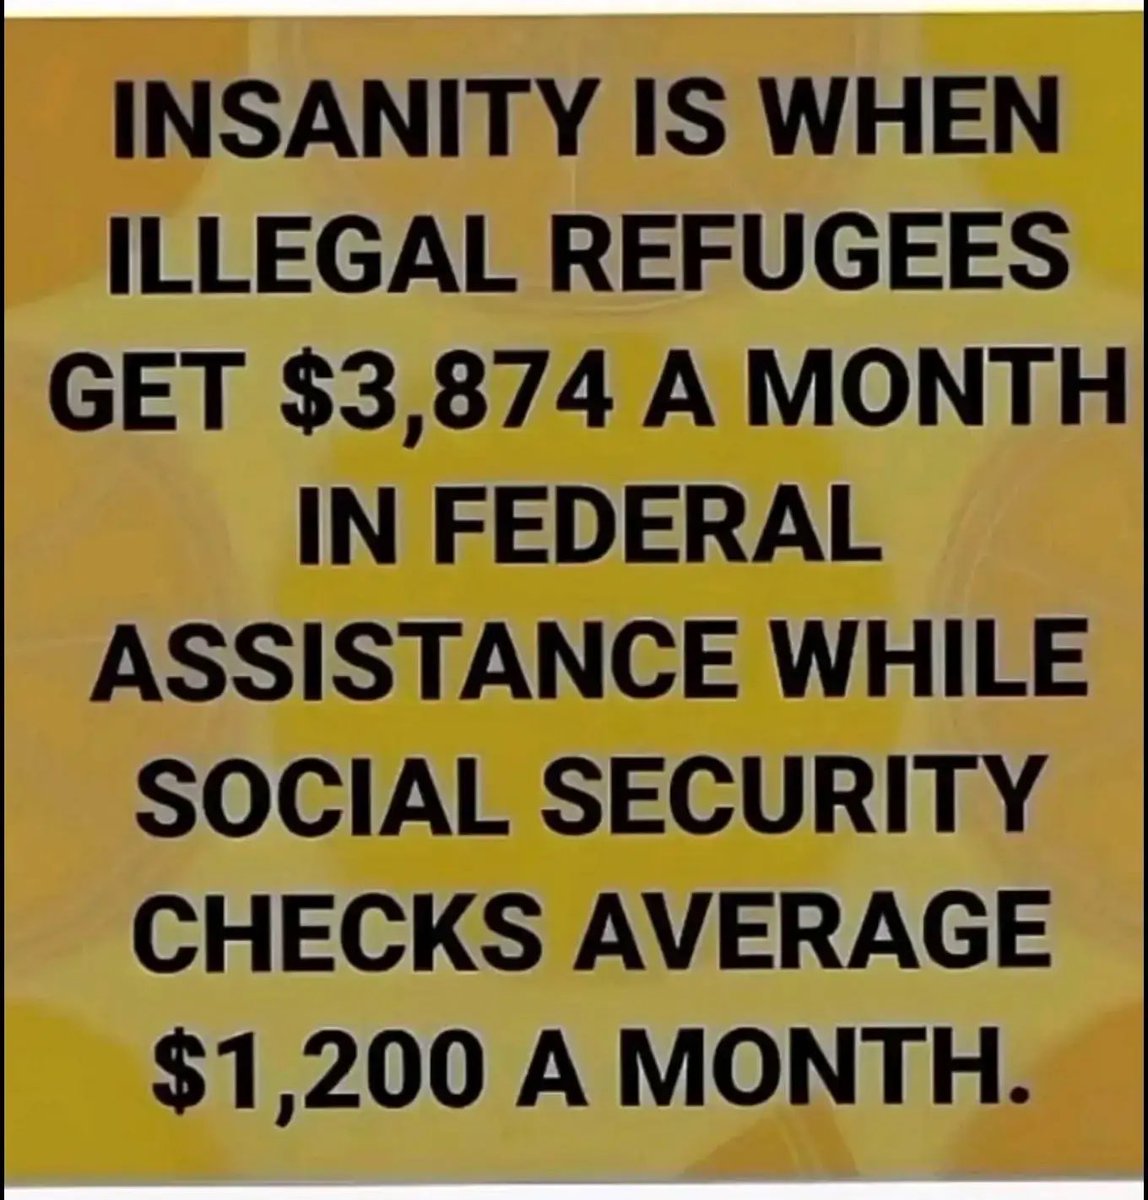 WTF said this is right? 

Illegals get over $3k month and average Social Security payment is $1200.